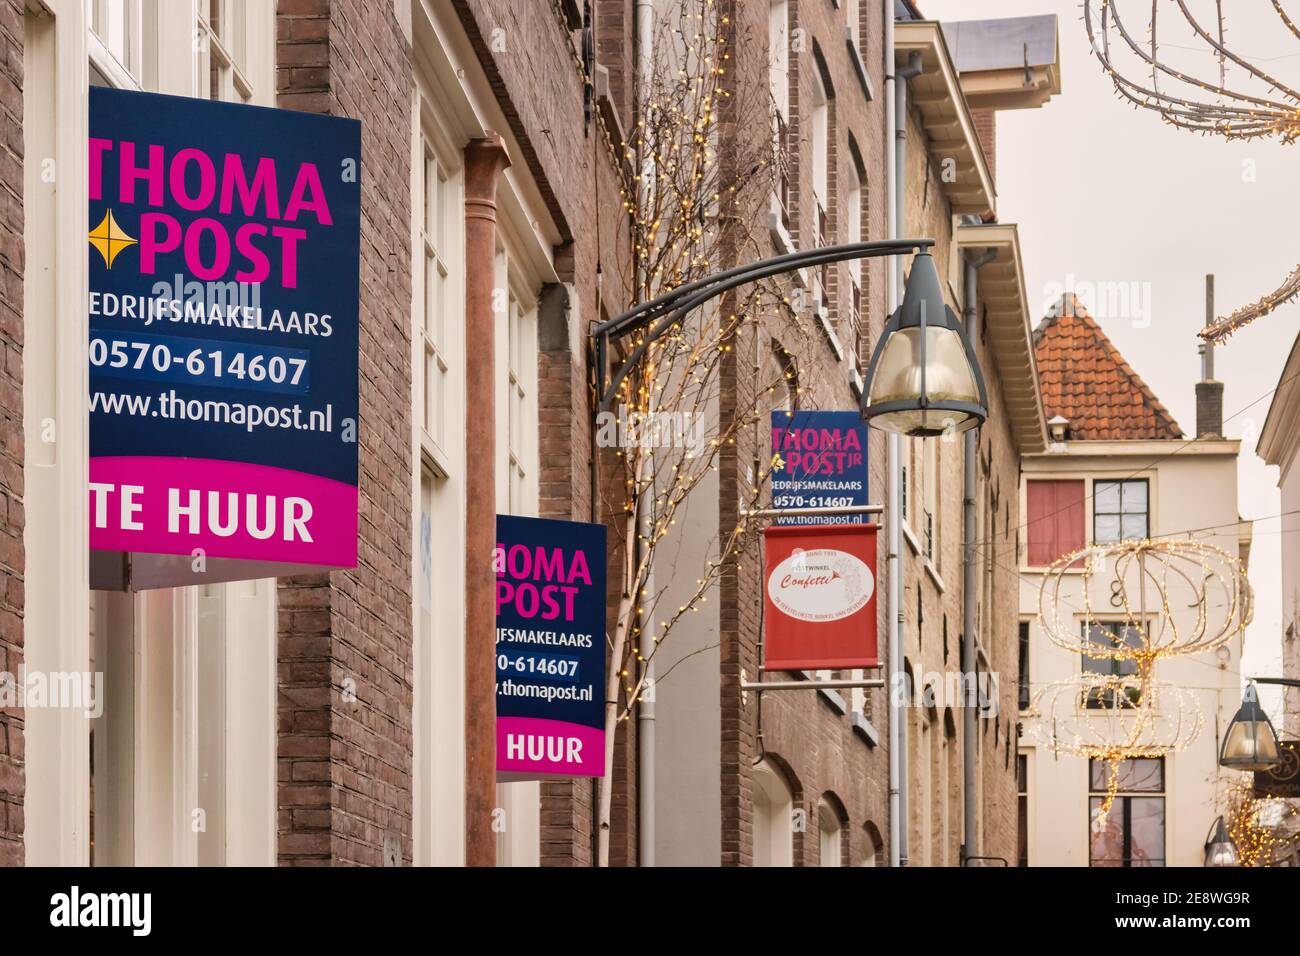 Deventer, The Netherlands - January 14, 2021: Dutch empty stores with for rent signs in the historic city center of Deventer, The Netherlands Stock Photo